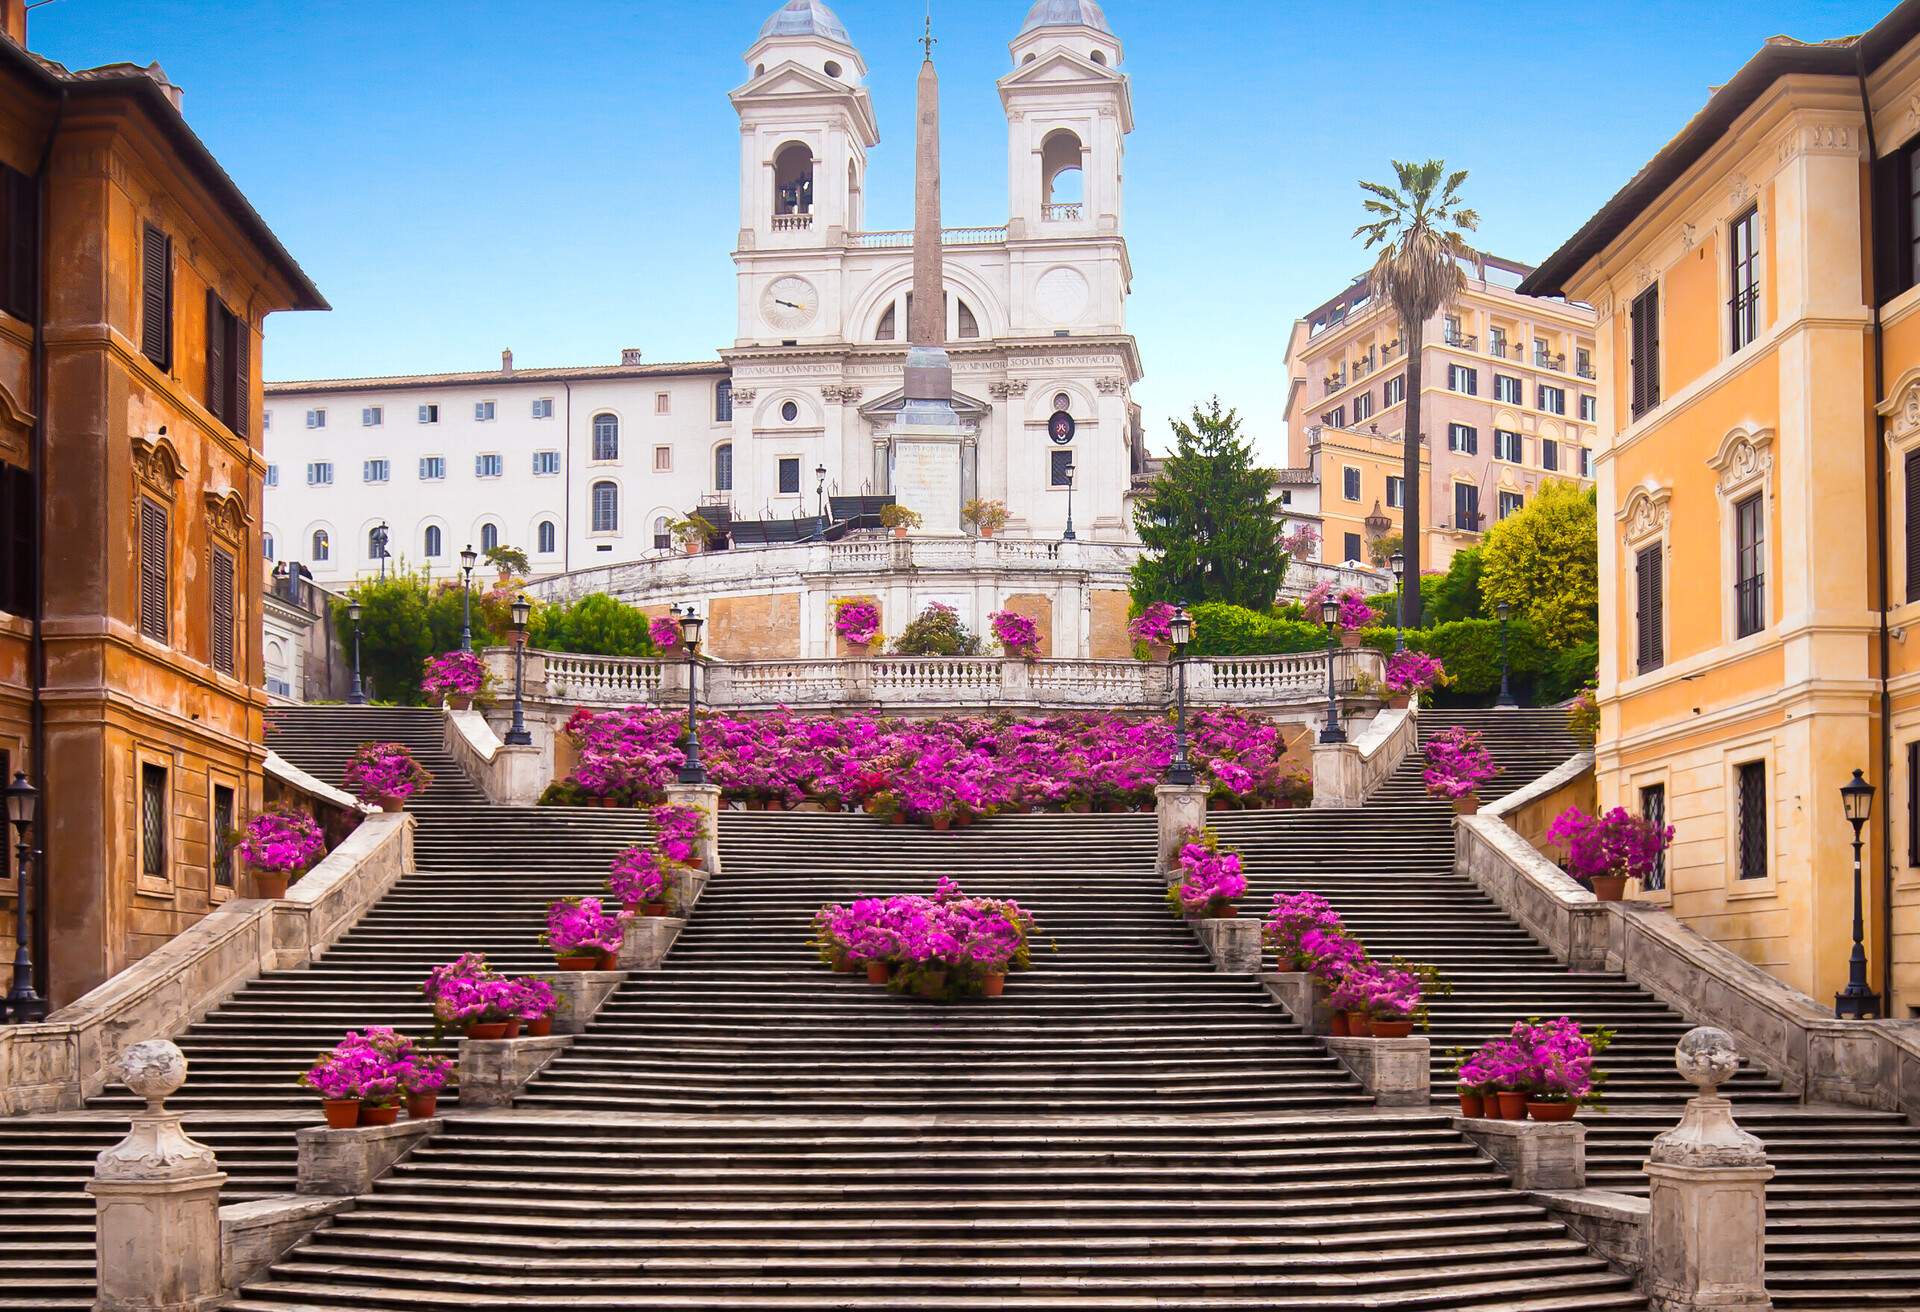 A Spanish steps adorned with purple flowering plants surrounded by classic buildings towards a renaissance church with two bell towers.